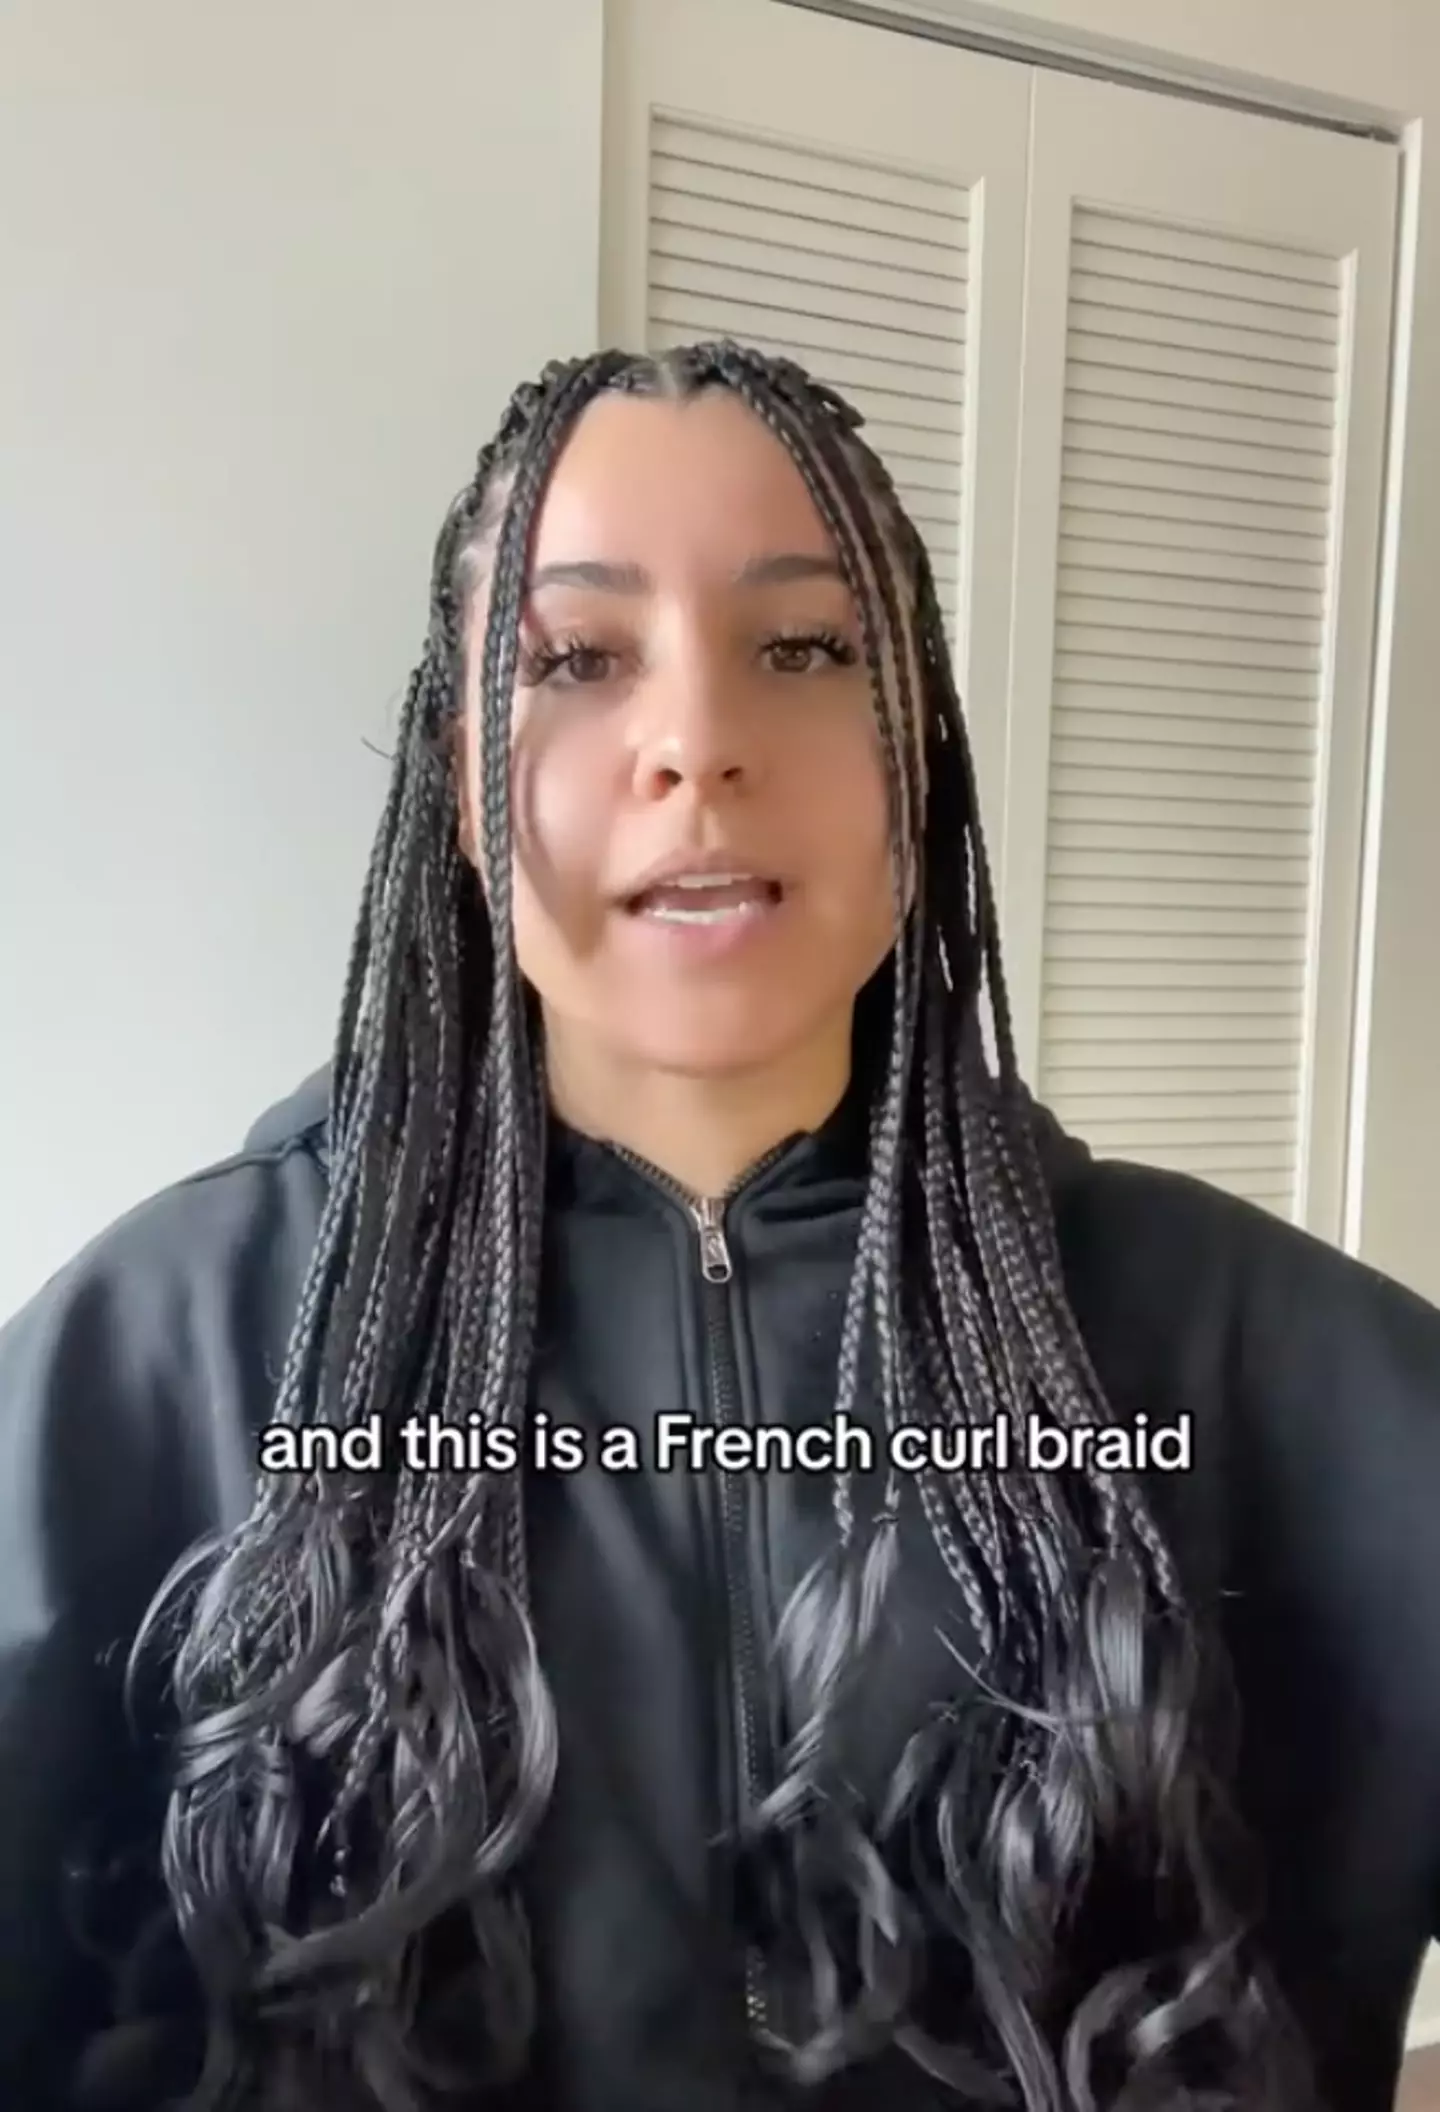 Her braids cost $350 to get done.